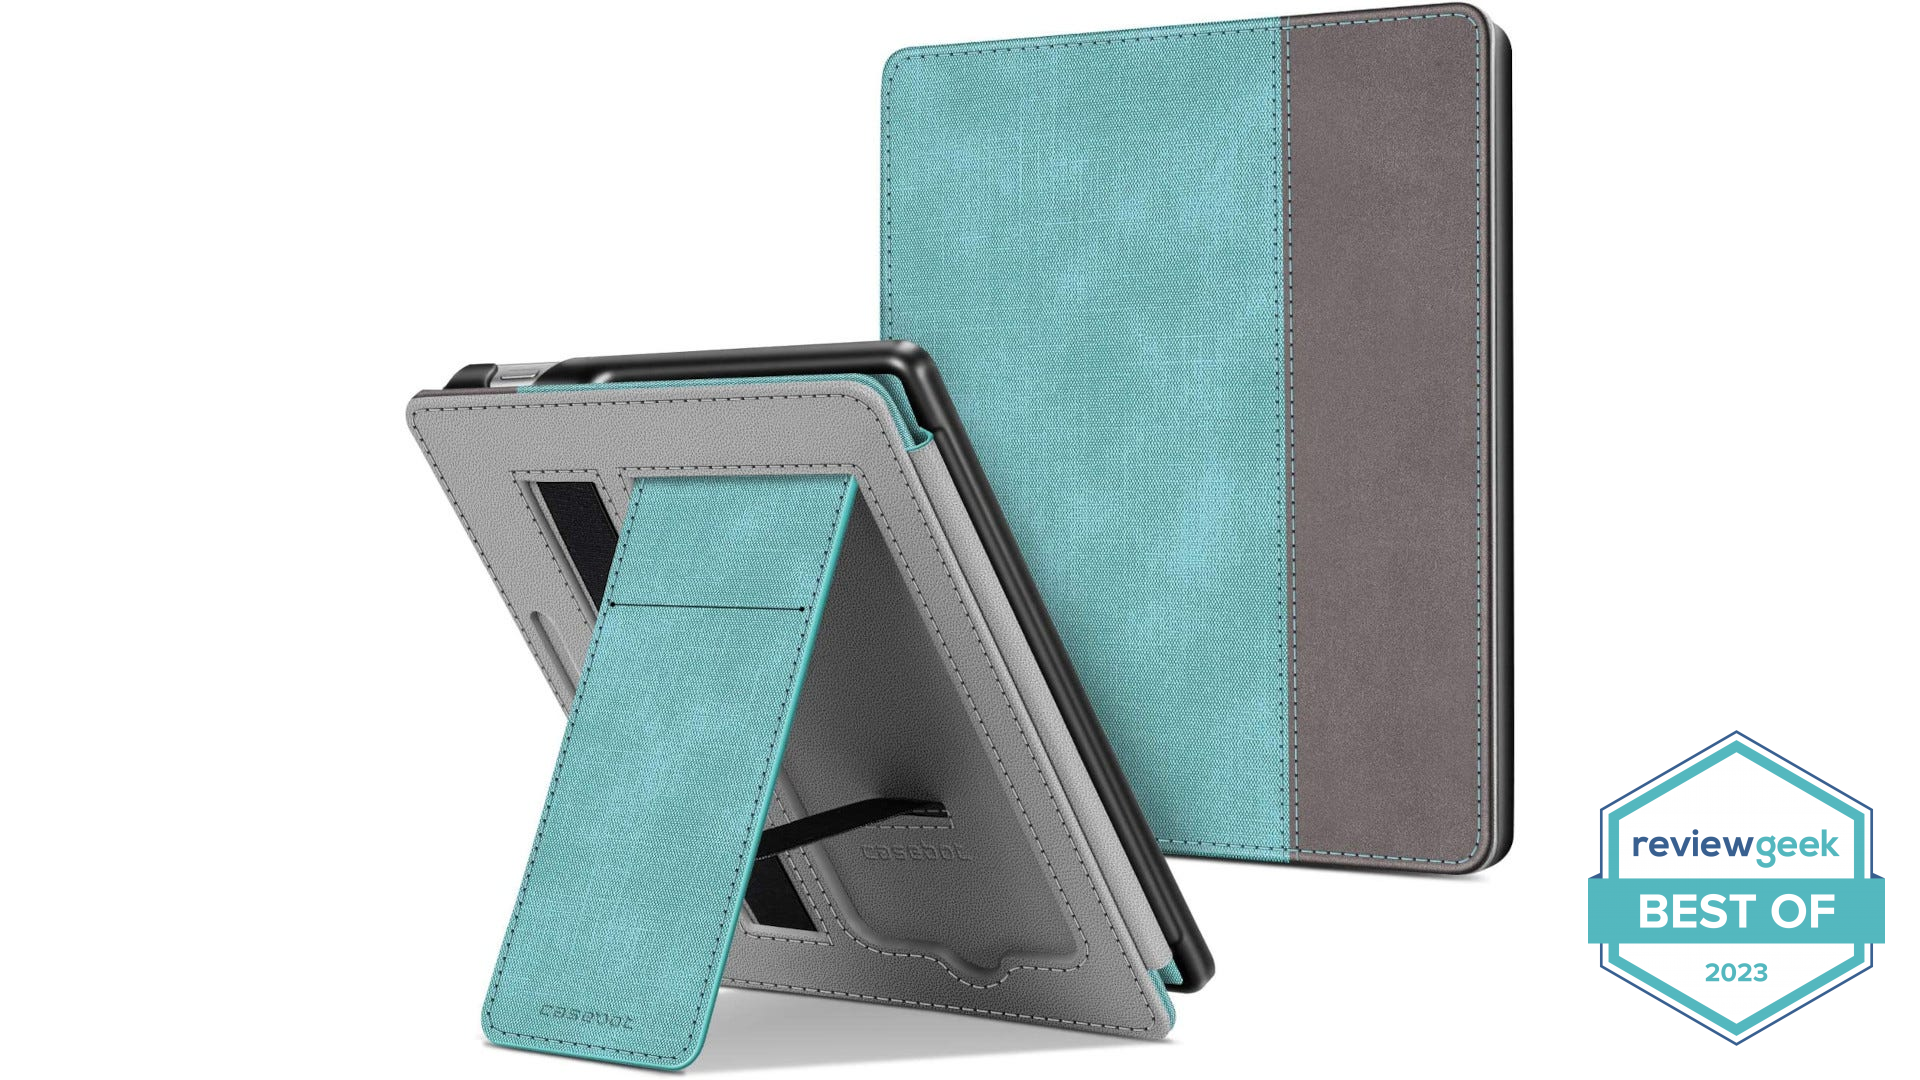 Two versions of a Kindle Oasis case are displayed. One is closed and the other is open using the stand feature.